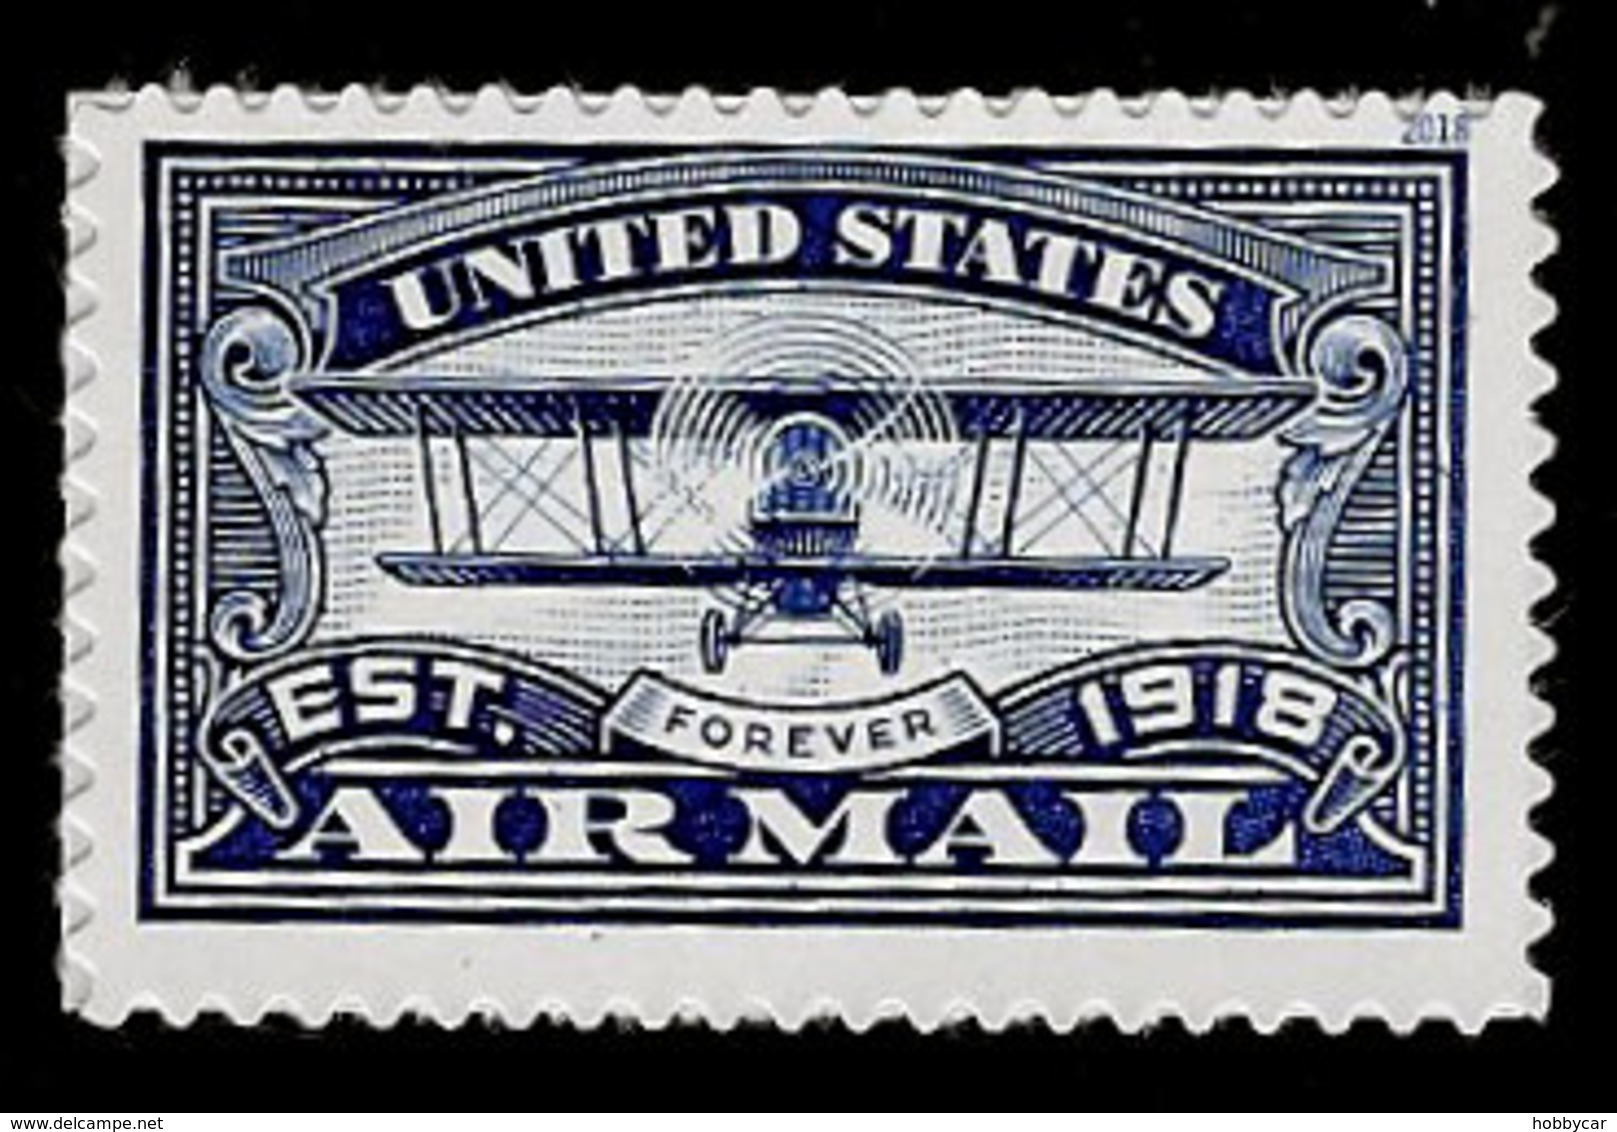 USA, 2018, 5281,Airmail, Blue, Single Forever, MNH, VF - Unused Stamps